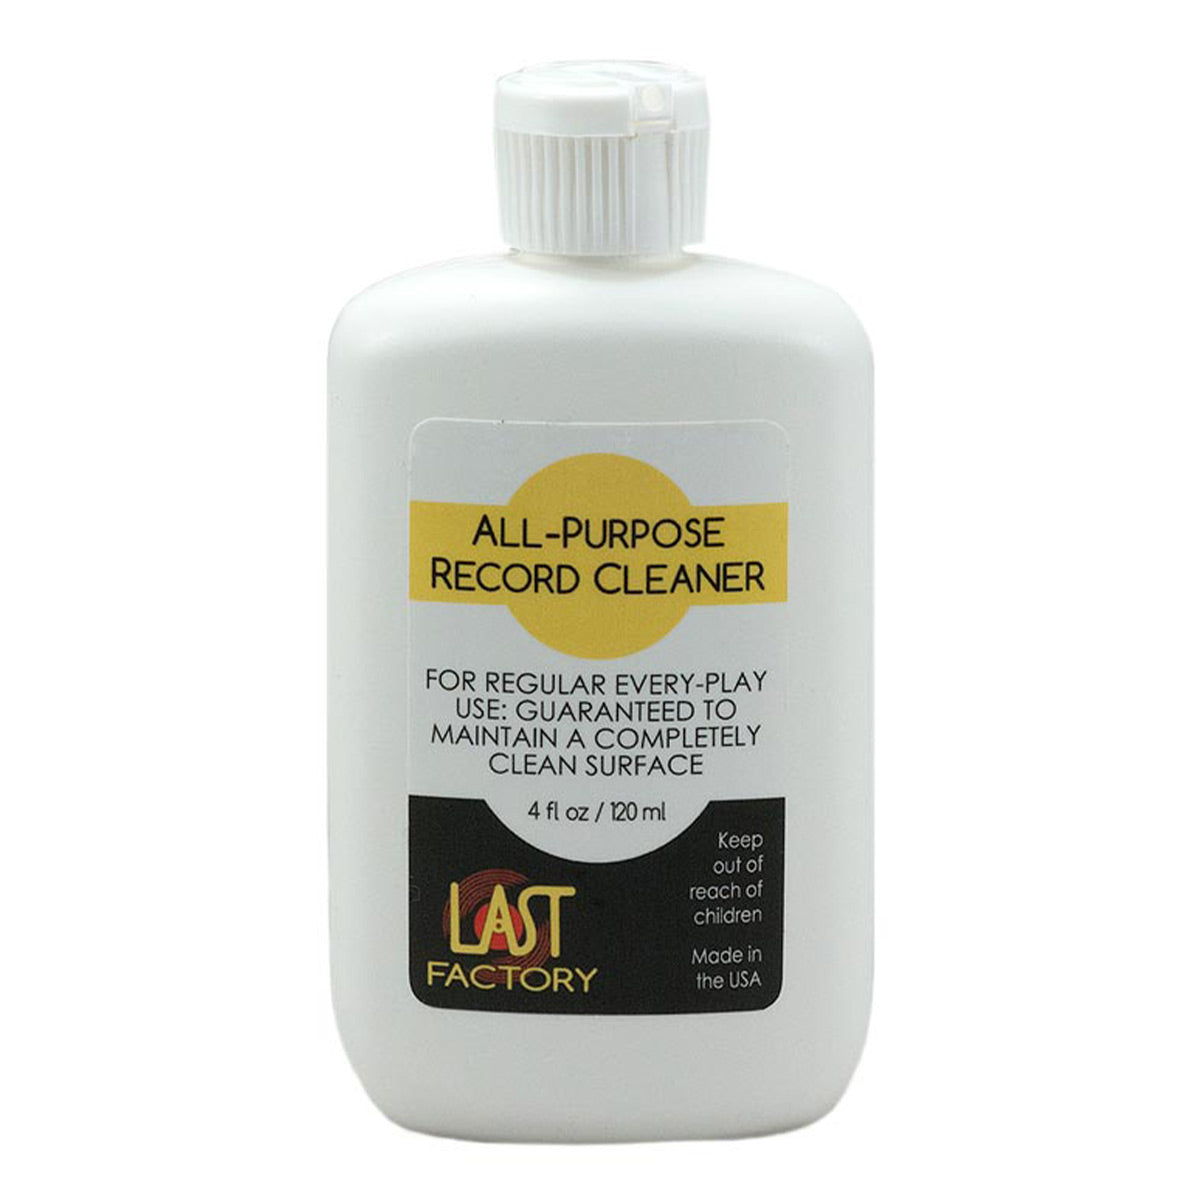 The Last Factory LAST All-Purpose Record Cleaner - 4 oz.